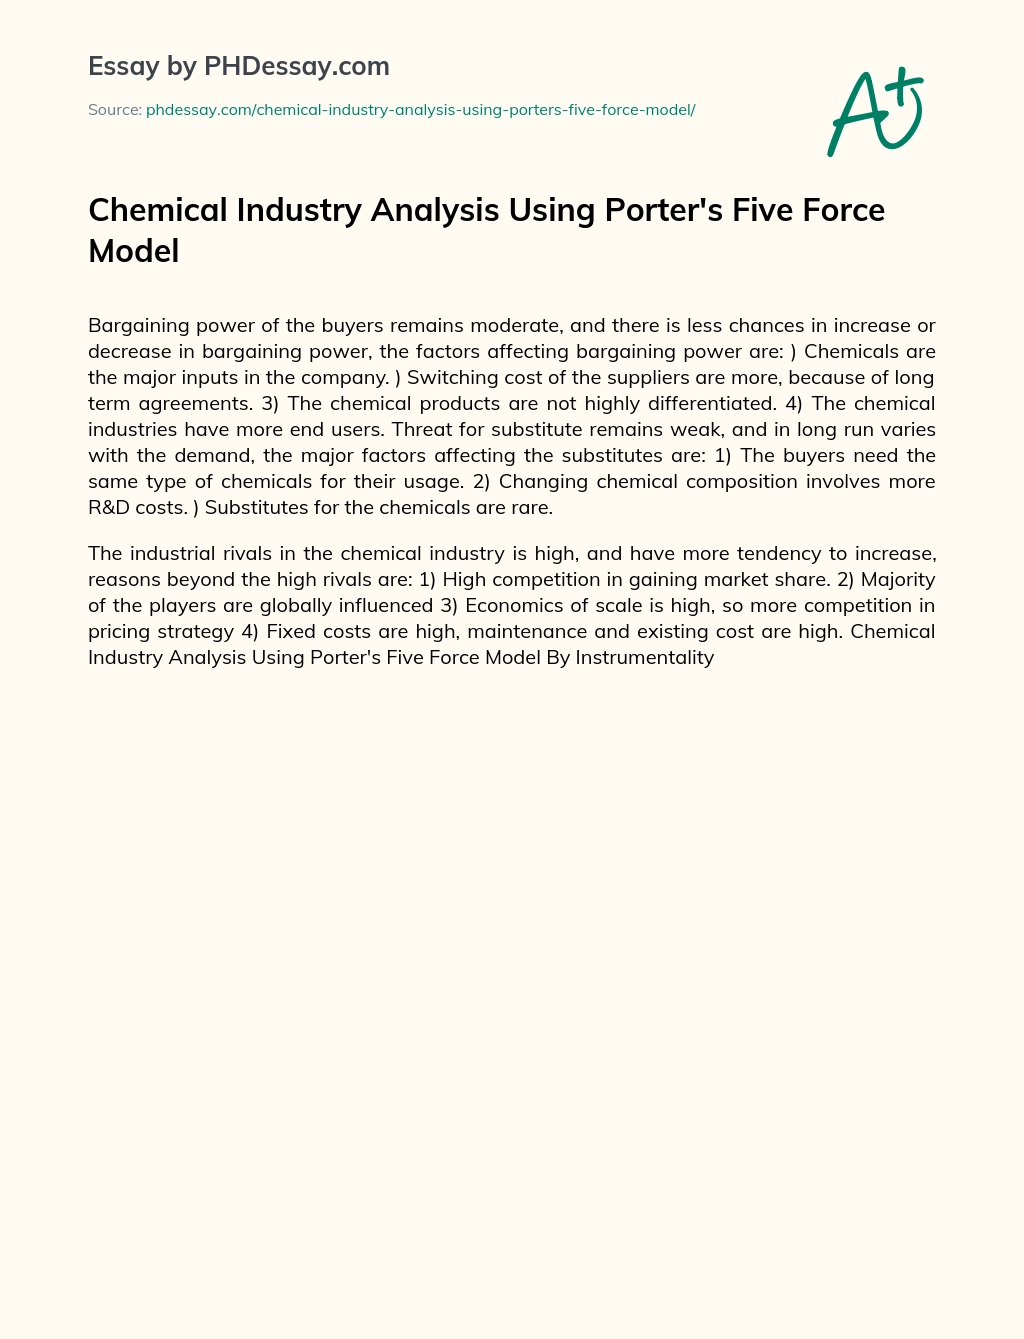 Chemical industry analysis using Porter’s five force model essay